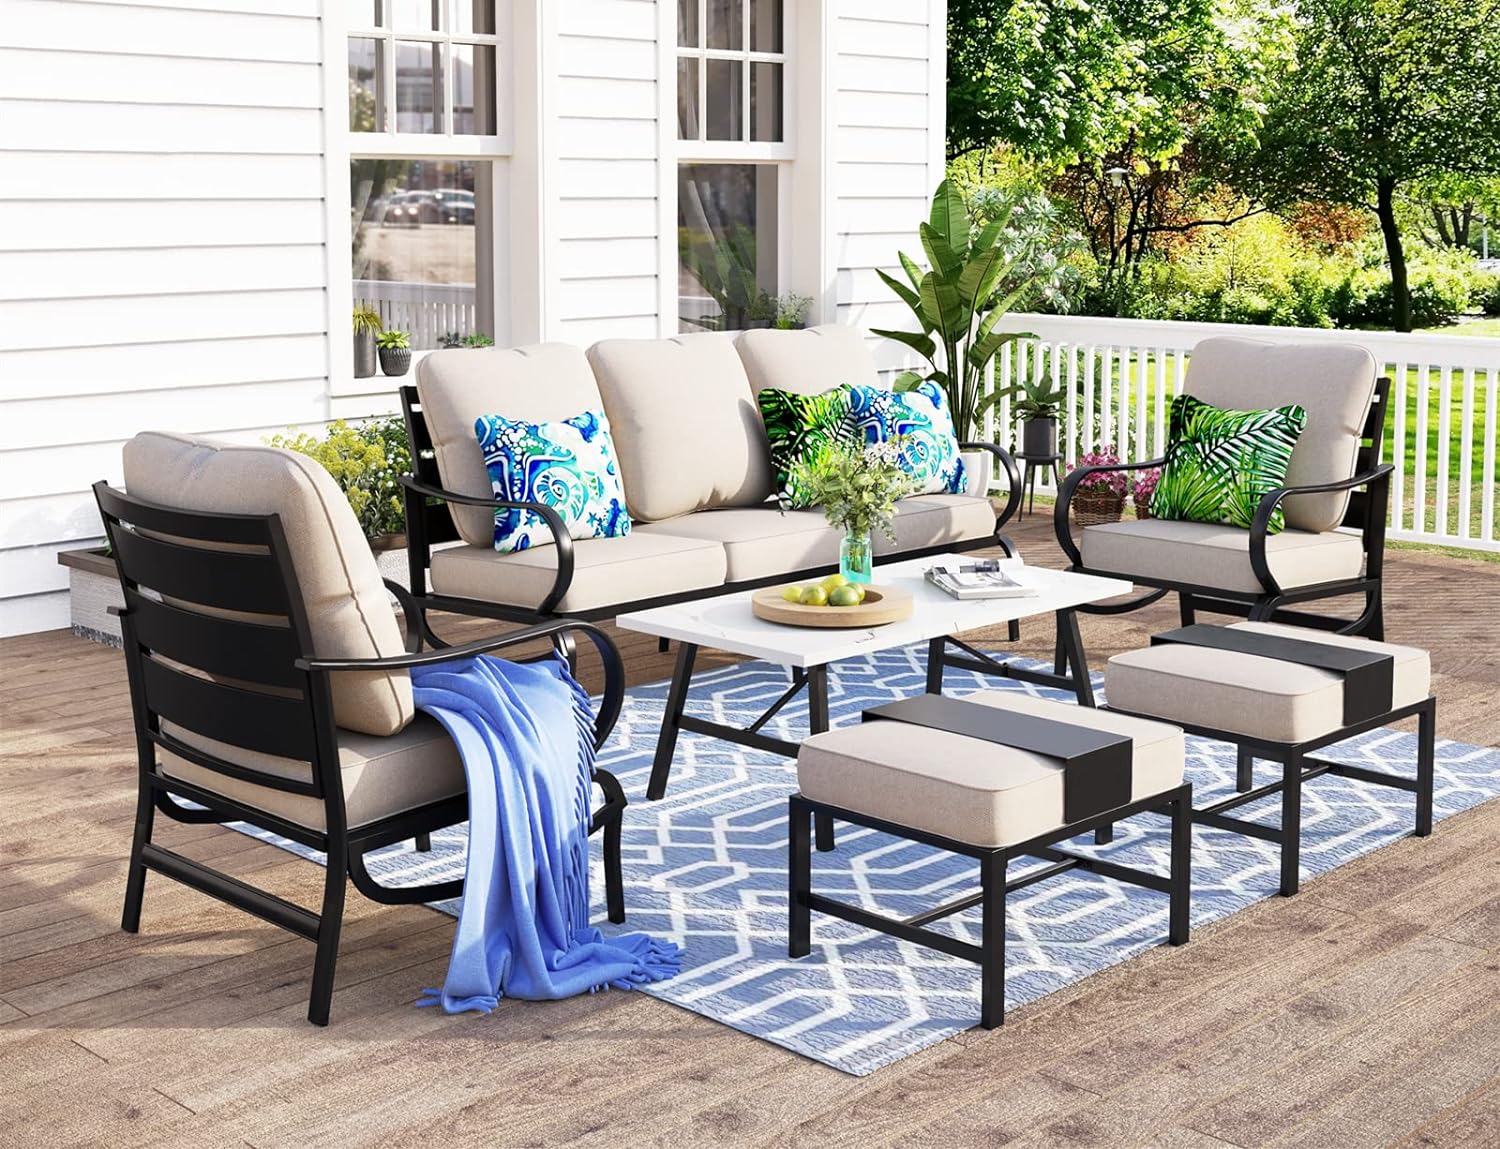 MFSTUDIO 6 Pieces Patio Conversation Sets(7 Seat),Outdoor Metal Furniture Sofas with 1 x 3-Seat Sofa, 2 Single Chairs,2 Ottoman and & 1 Coffee Table,Wrought Iron Frame with Beige Cushion